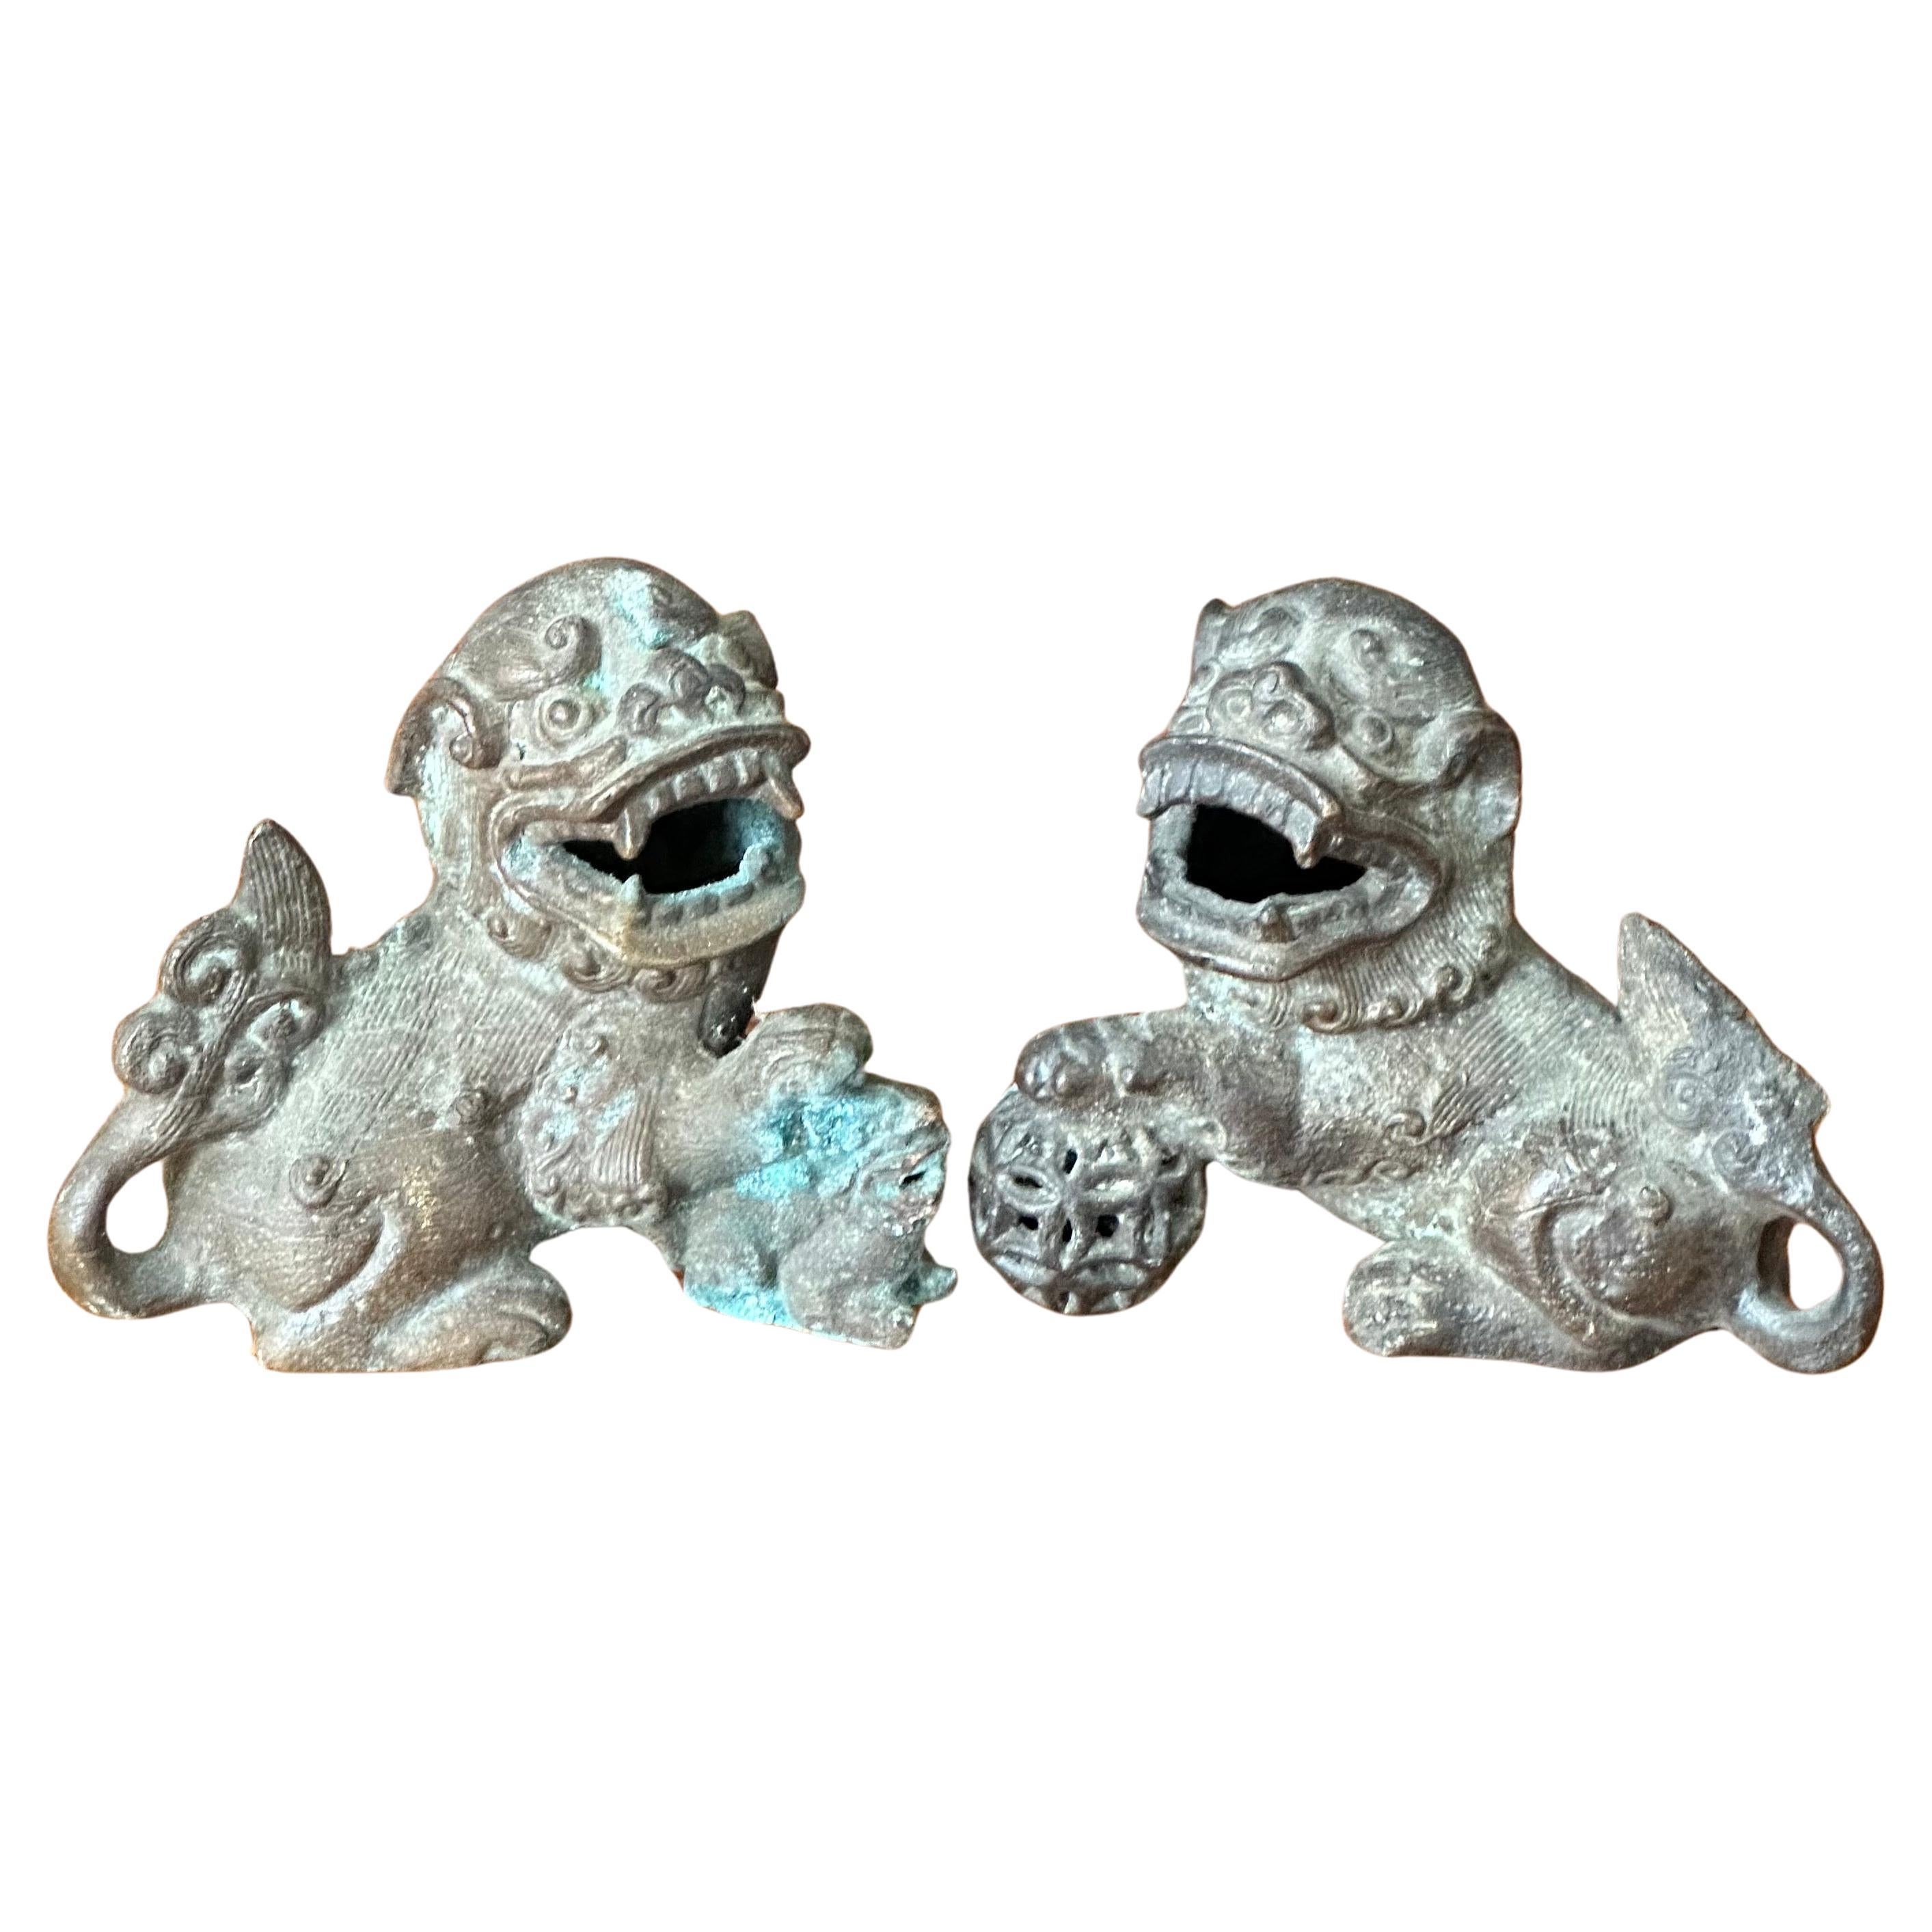 Pair of Patinated Bronze Chinese Foo Dogs